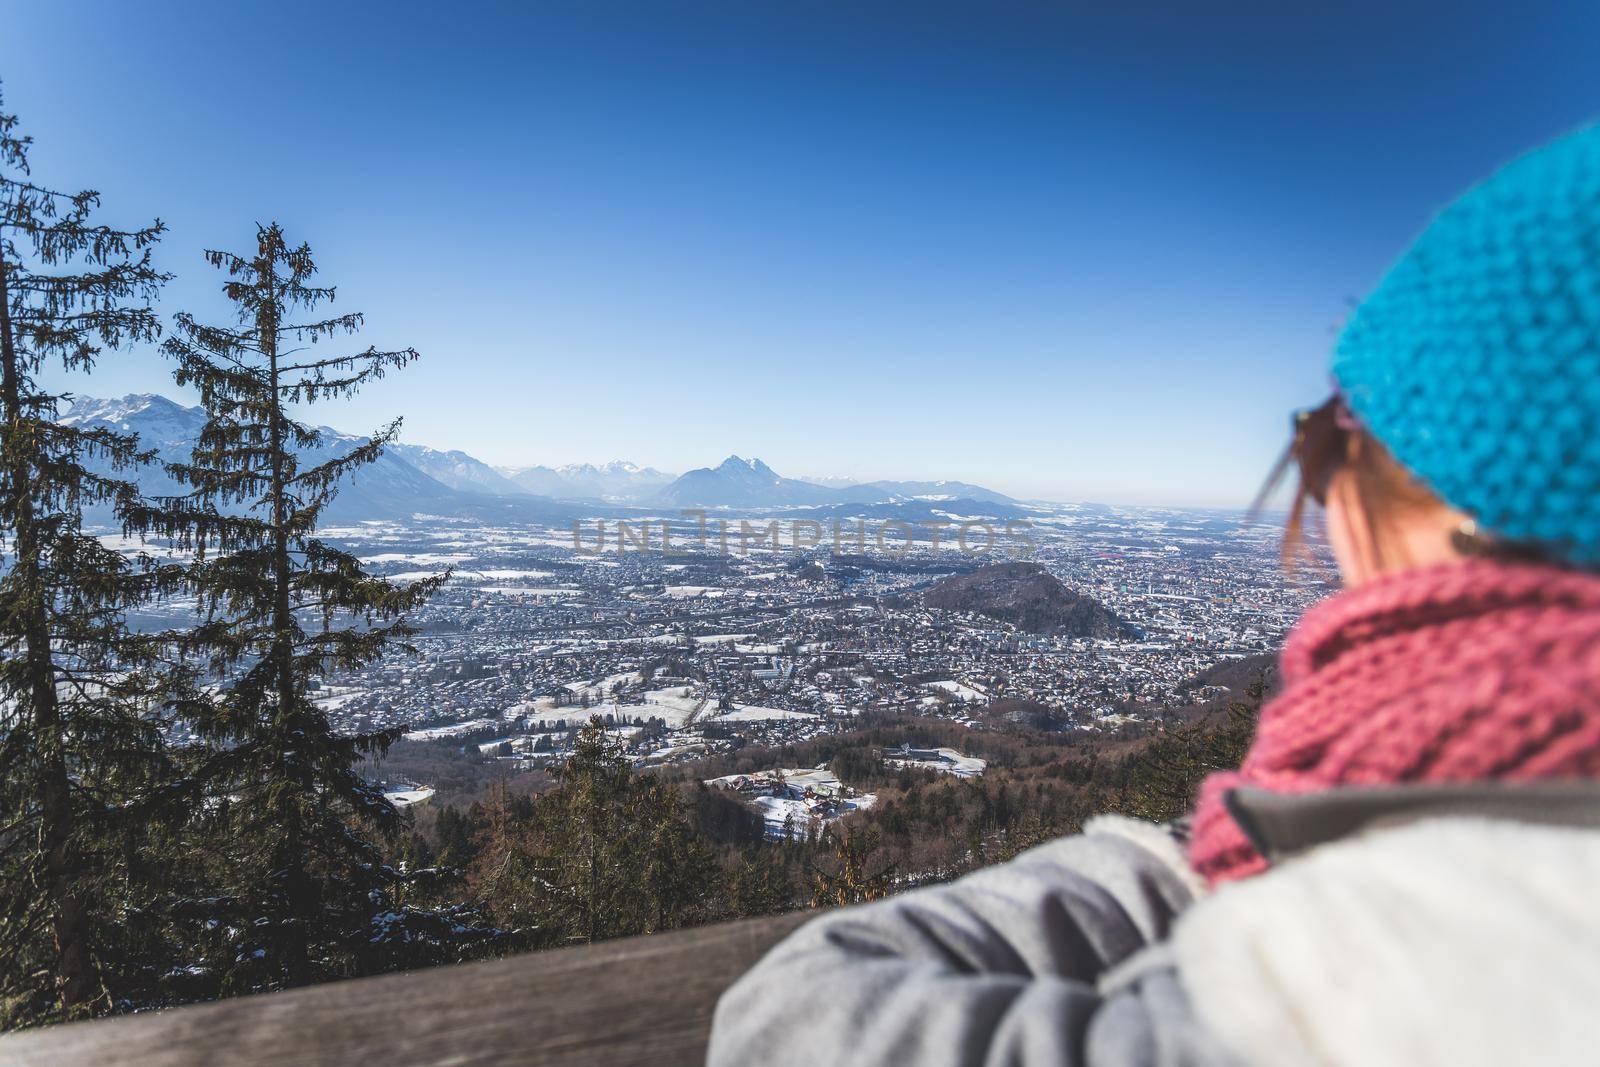 Back of young woman enjoying the view over the mountains, outlook. Gaisberg, Austria